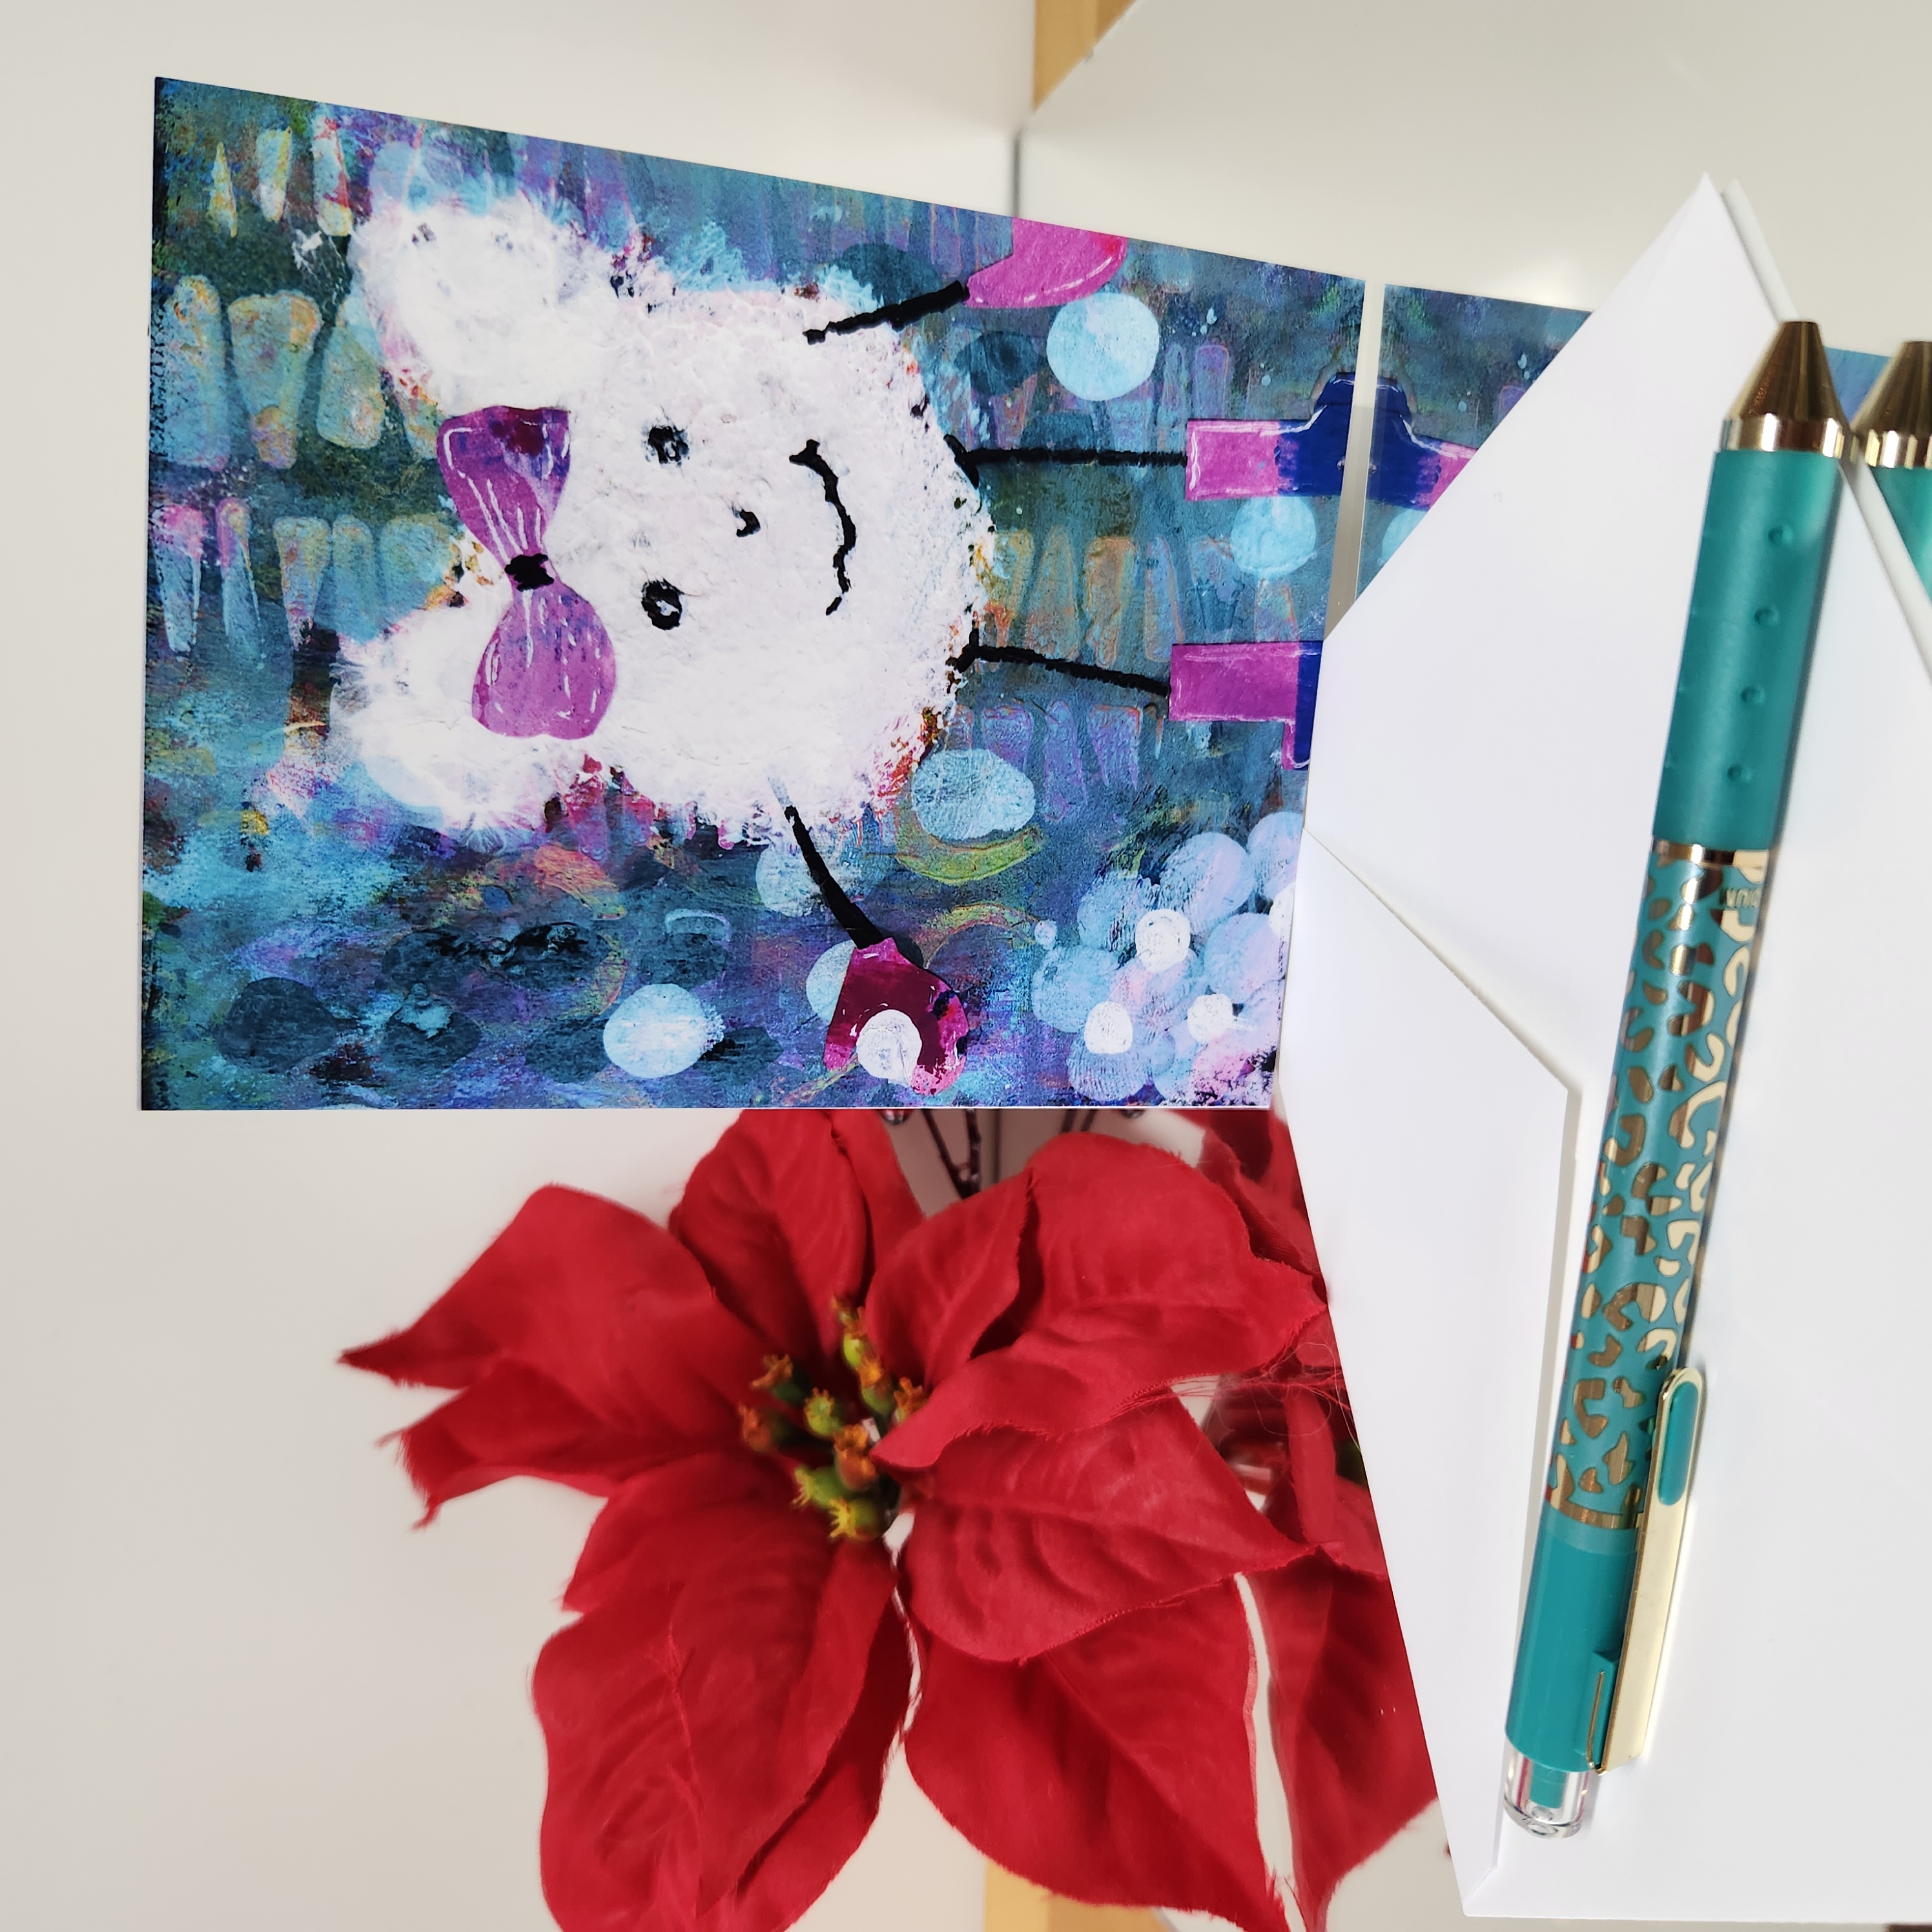 Snowball - A2 size greeting  card with snowgirl artwork on the front. Patty Donahue artist